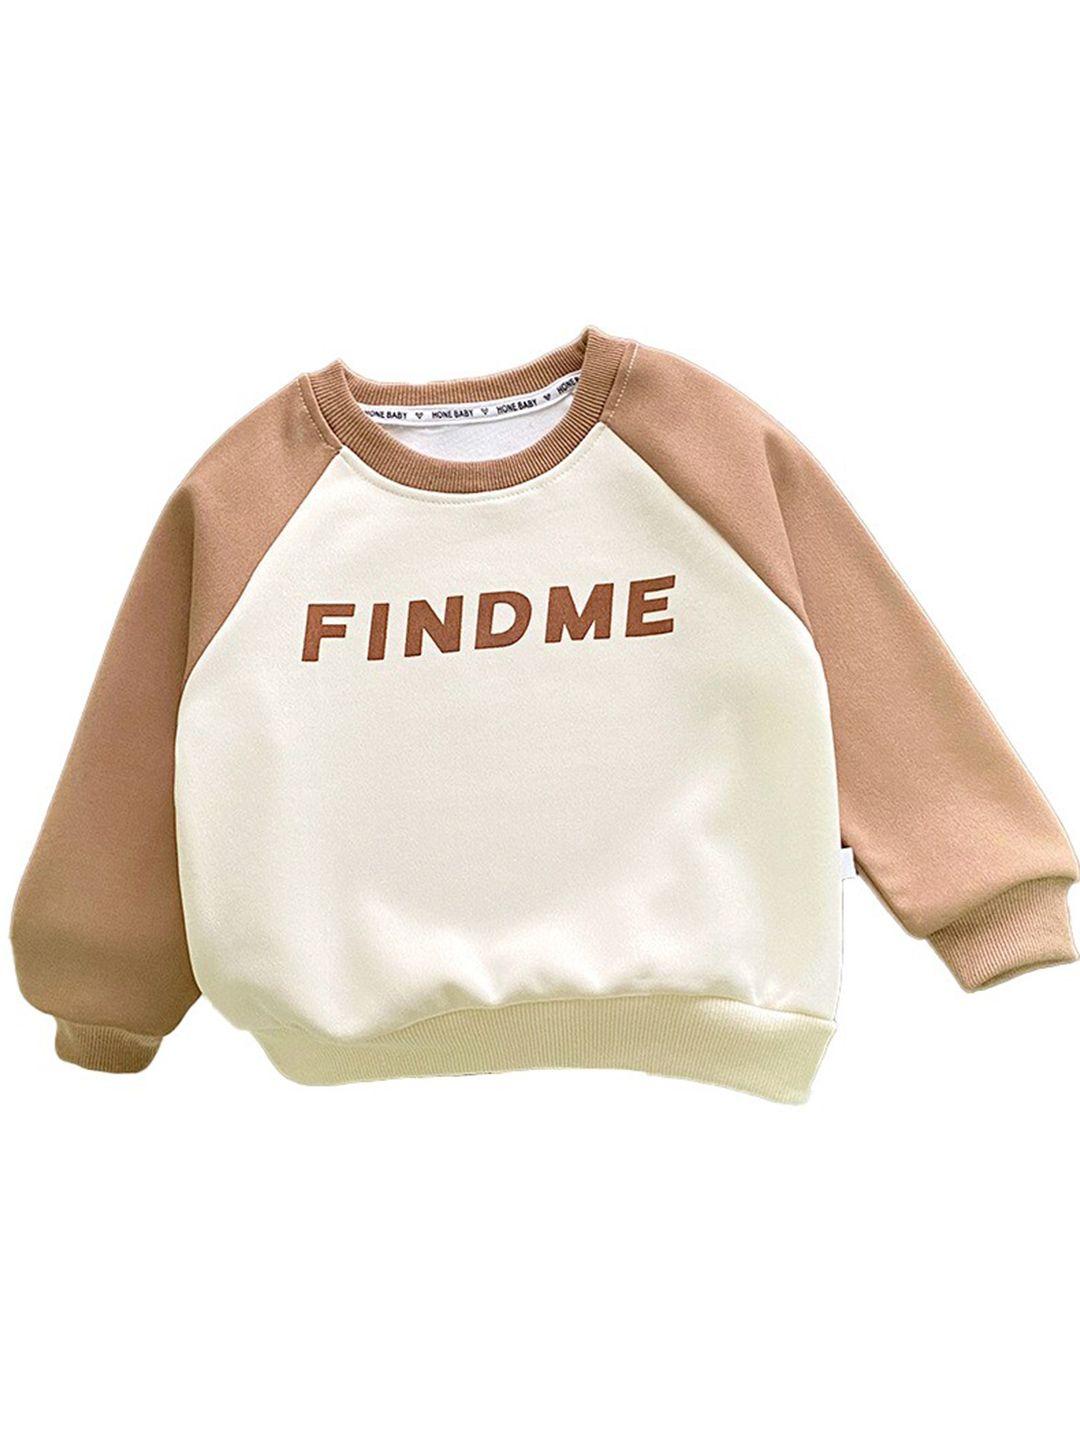 stylecast boys beige & off white typography printed pullover